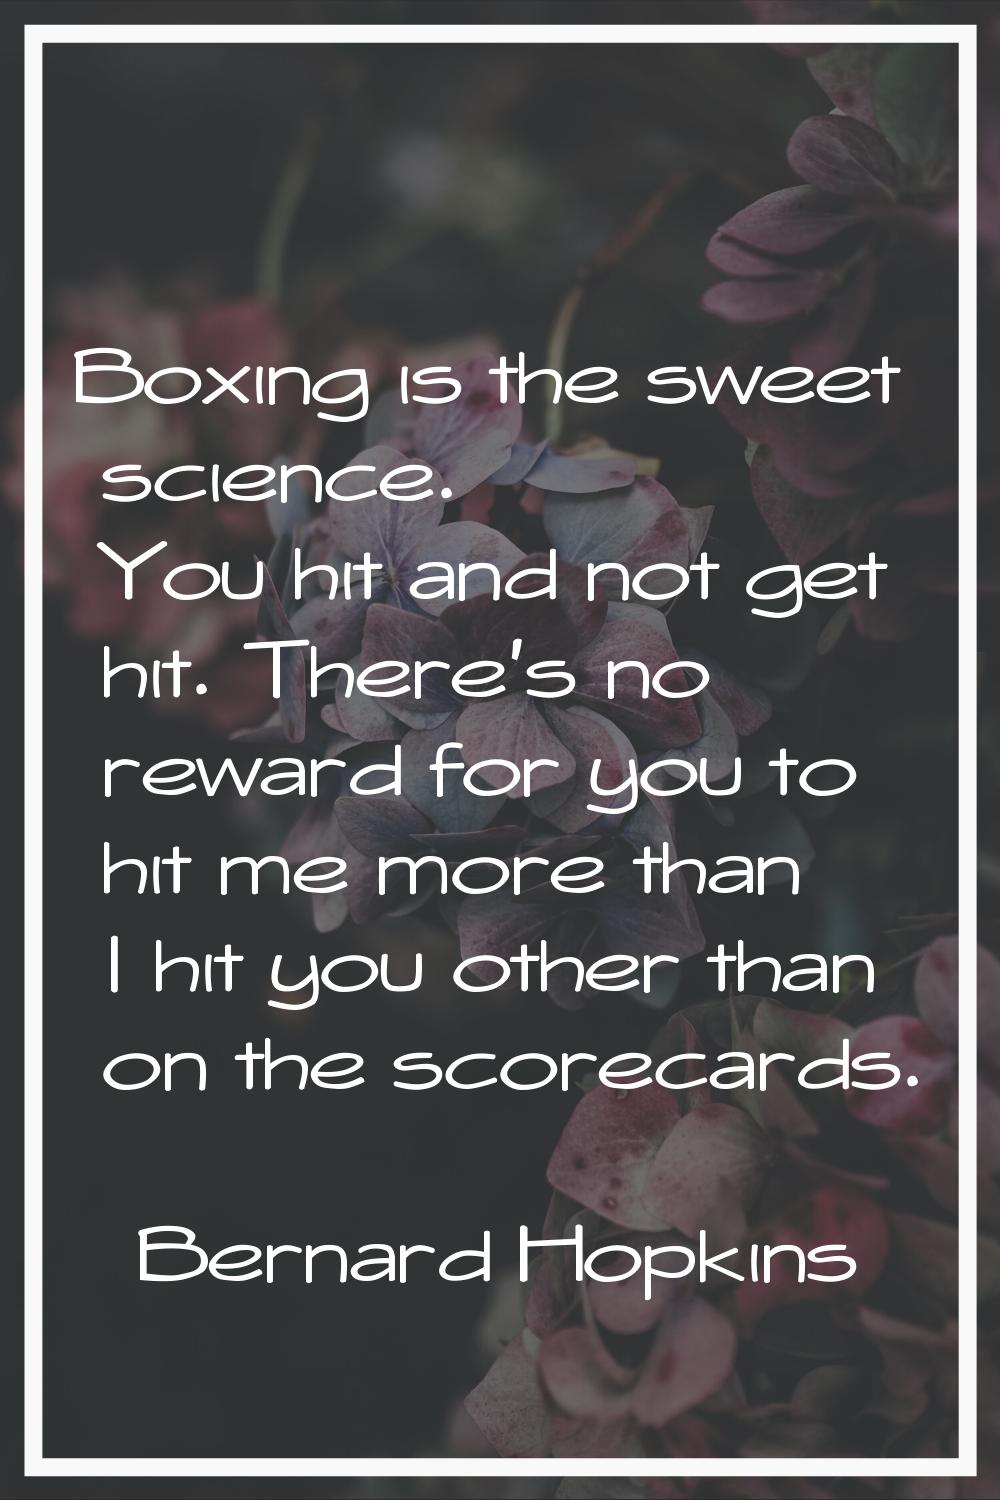 Boxing is the sweet science. You hit and not get hit. There's no reward for you to hit me more than